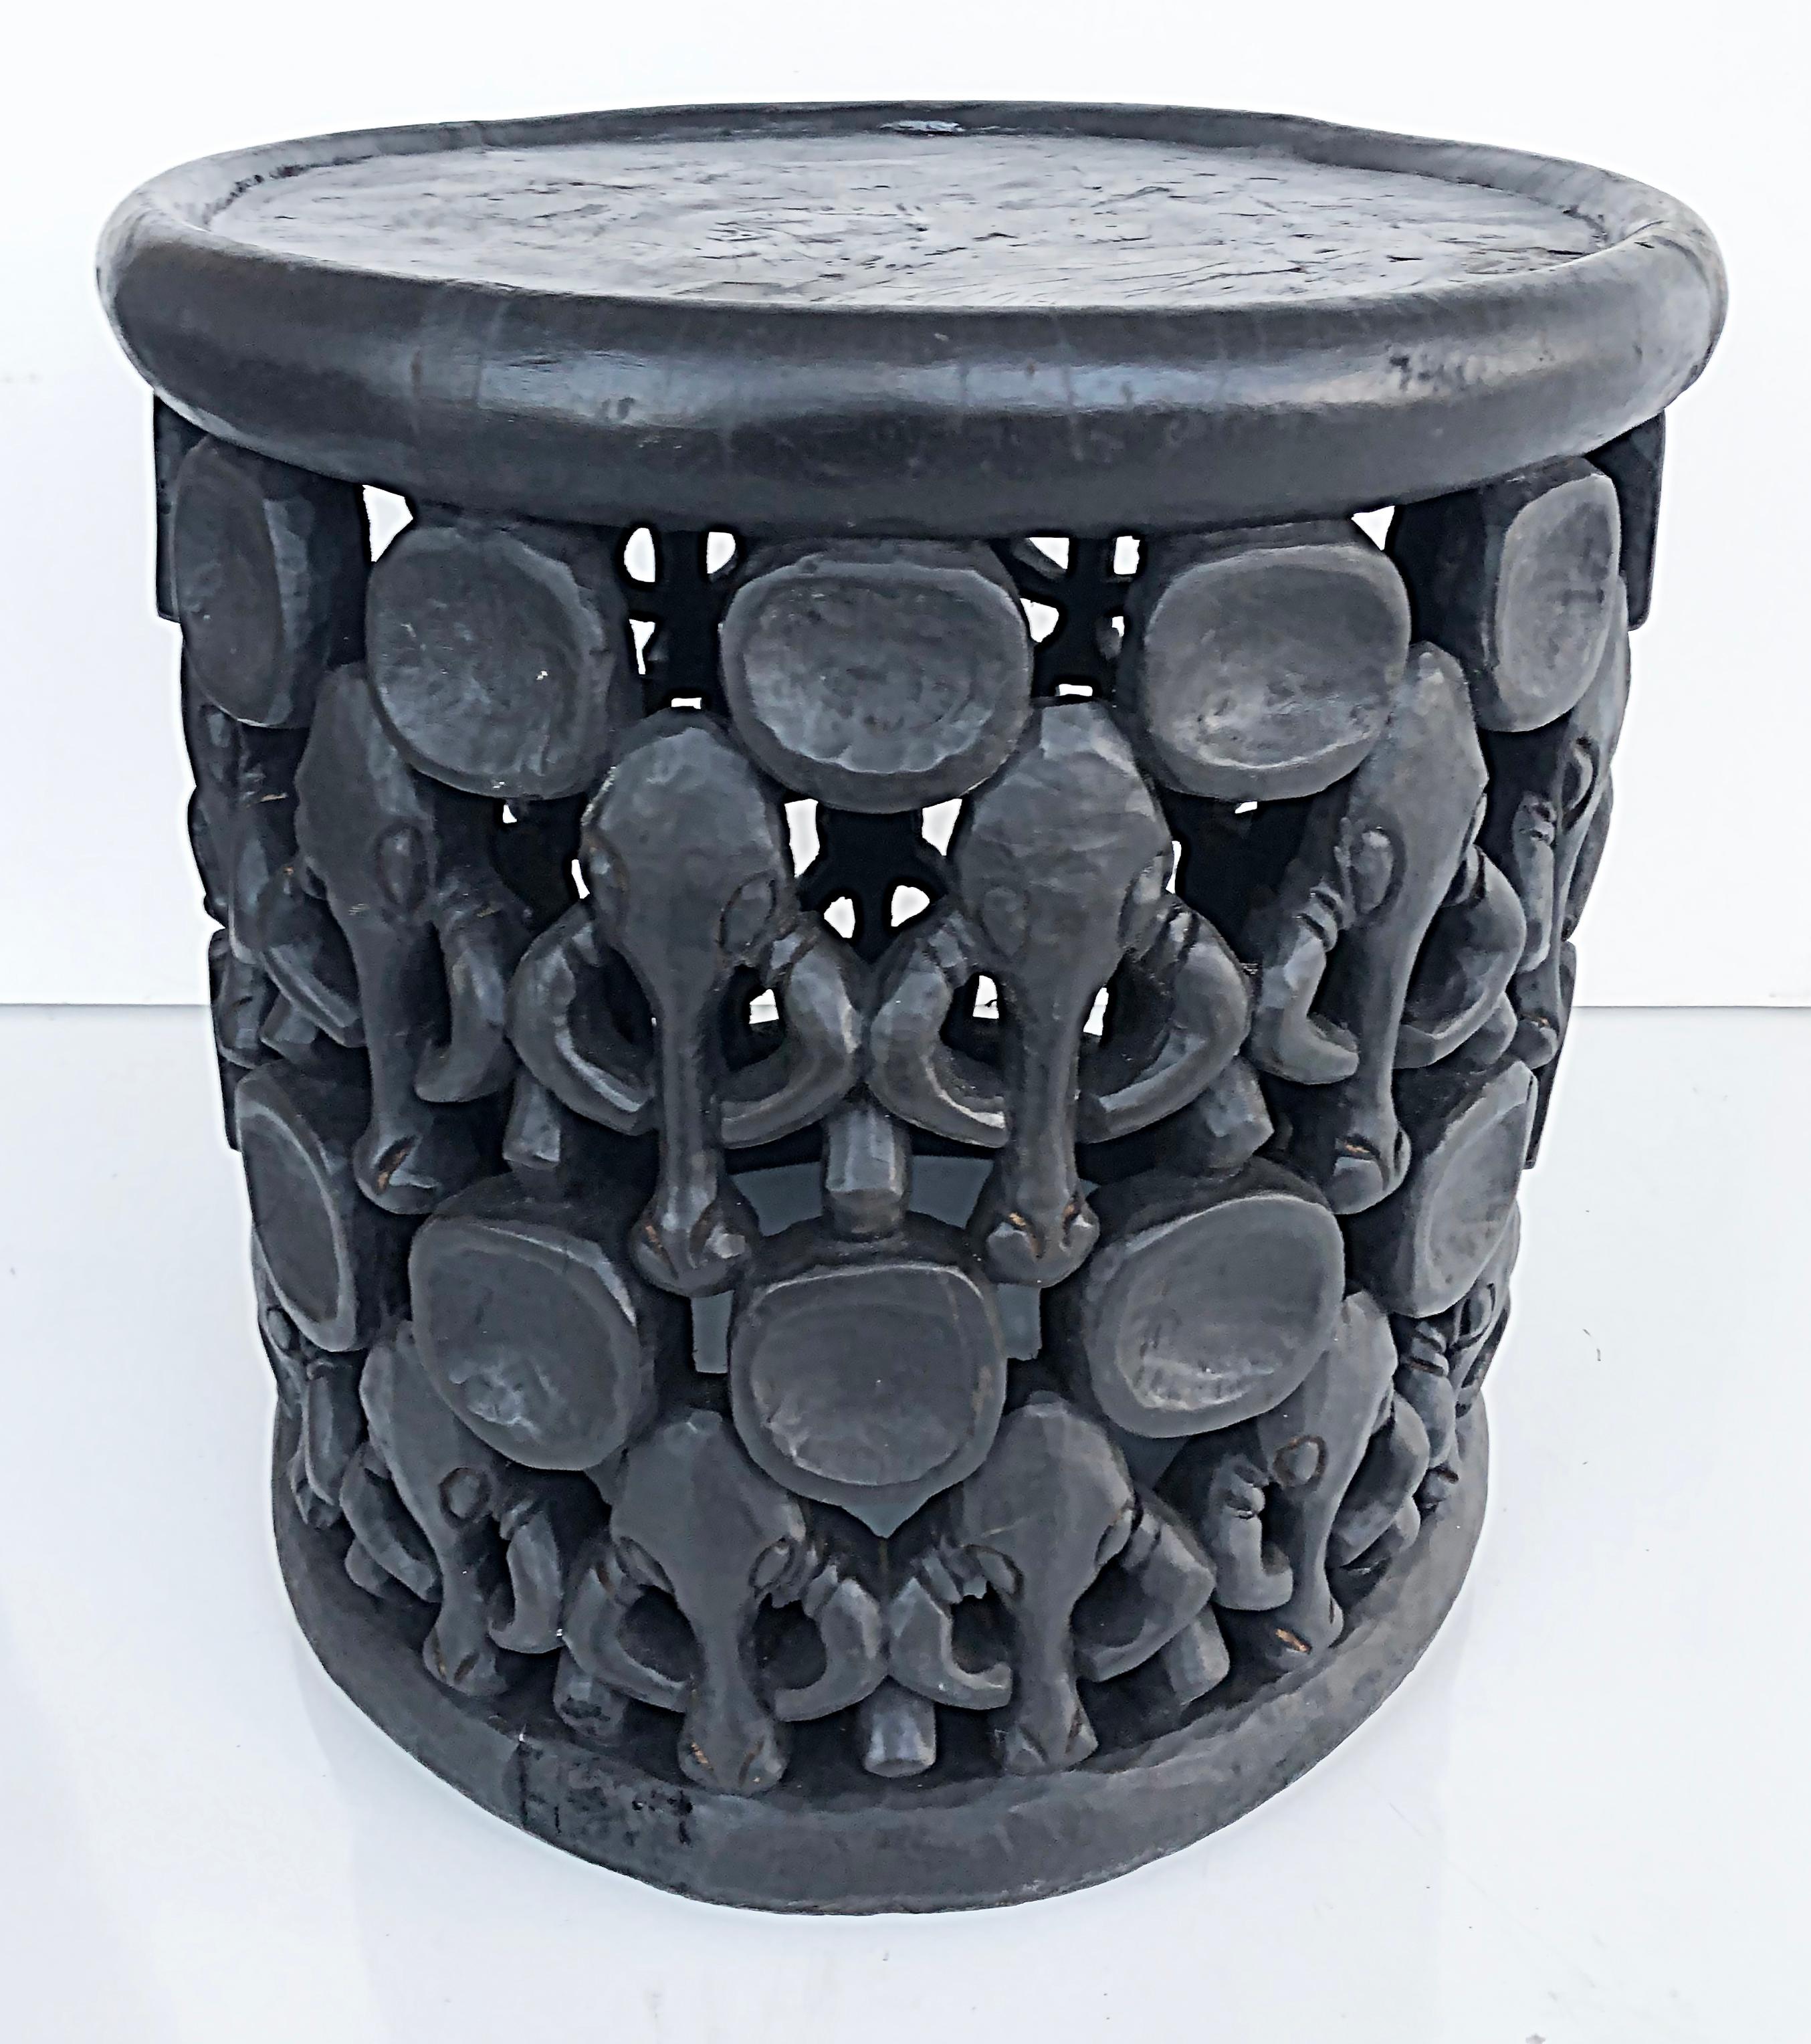 Modern African Bamileke table/stool with elephants.

Offered for sale is a modern mid to late 20th-century rare carved African wood side table or stool created in by the Bamileke people. The table is surrounded by carved elephants and is carved from